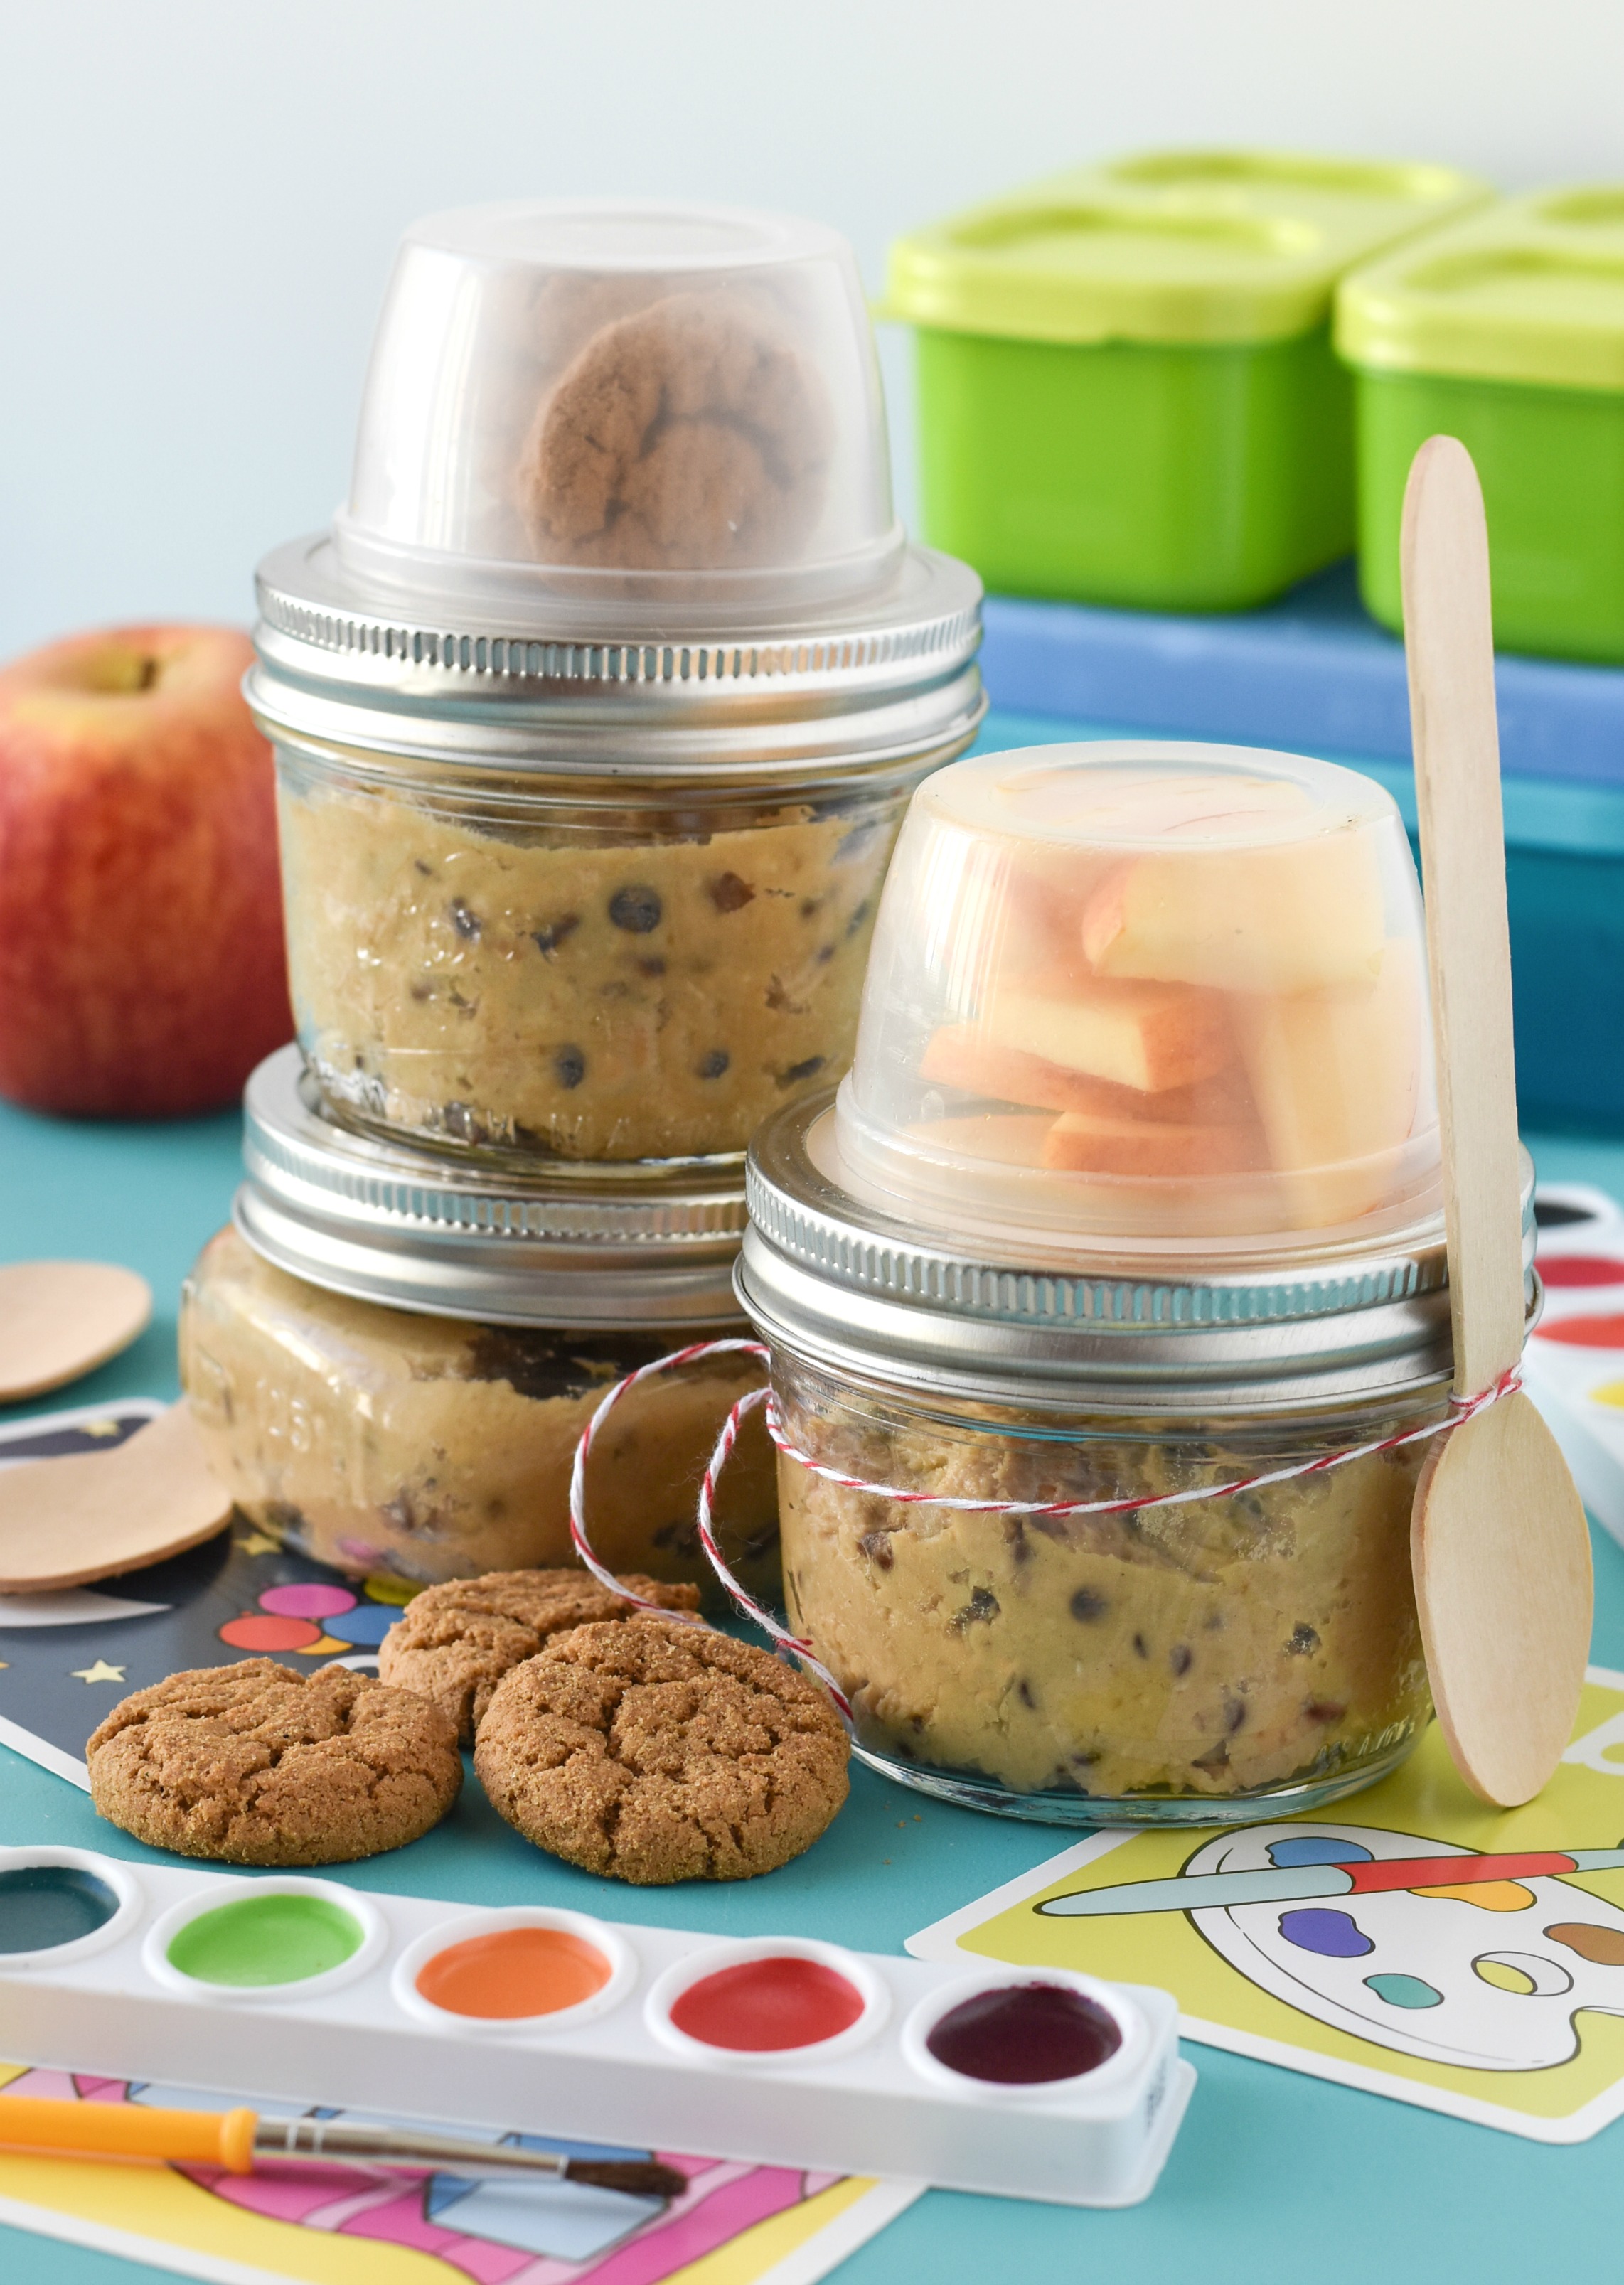 Made with garbanzo beans, these Cookie Dough Hummus Lunchables are a healthier treat option to throw into your kid's lunchbox!